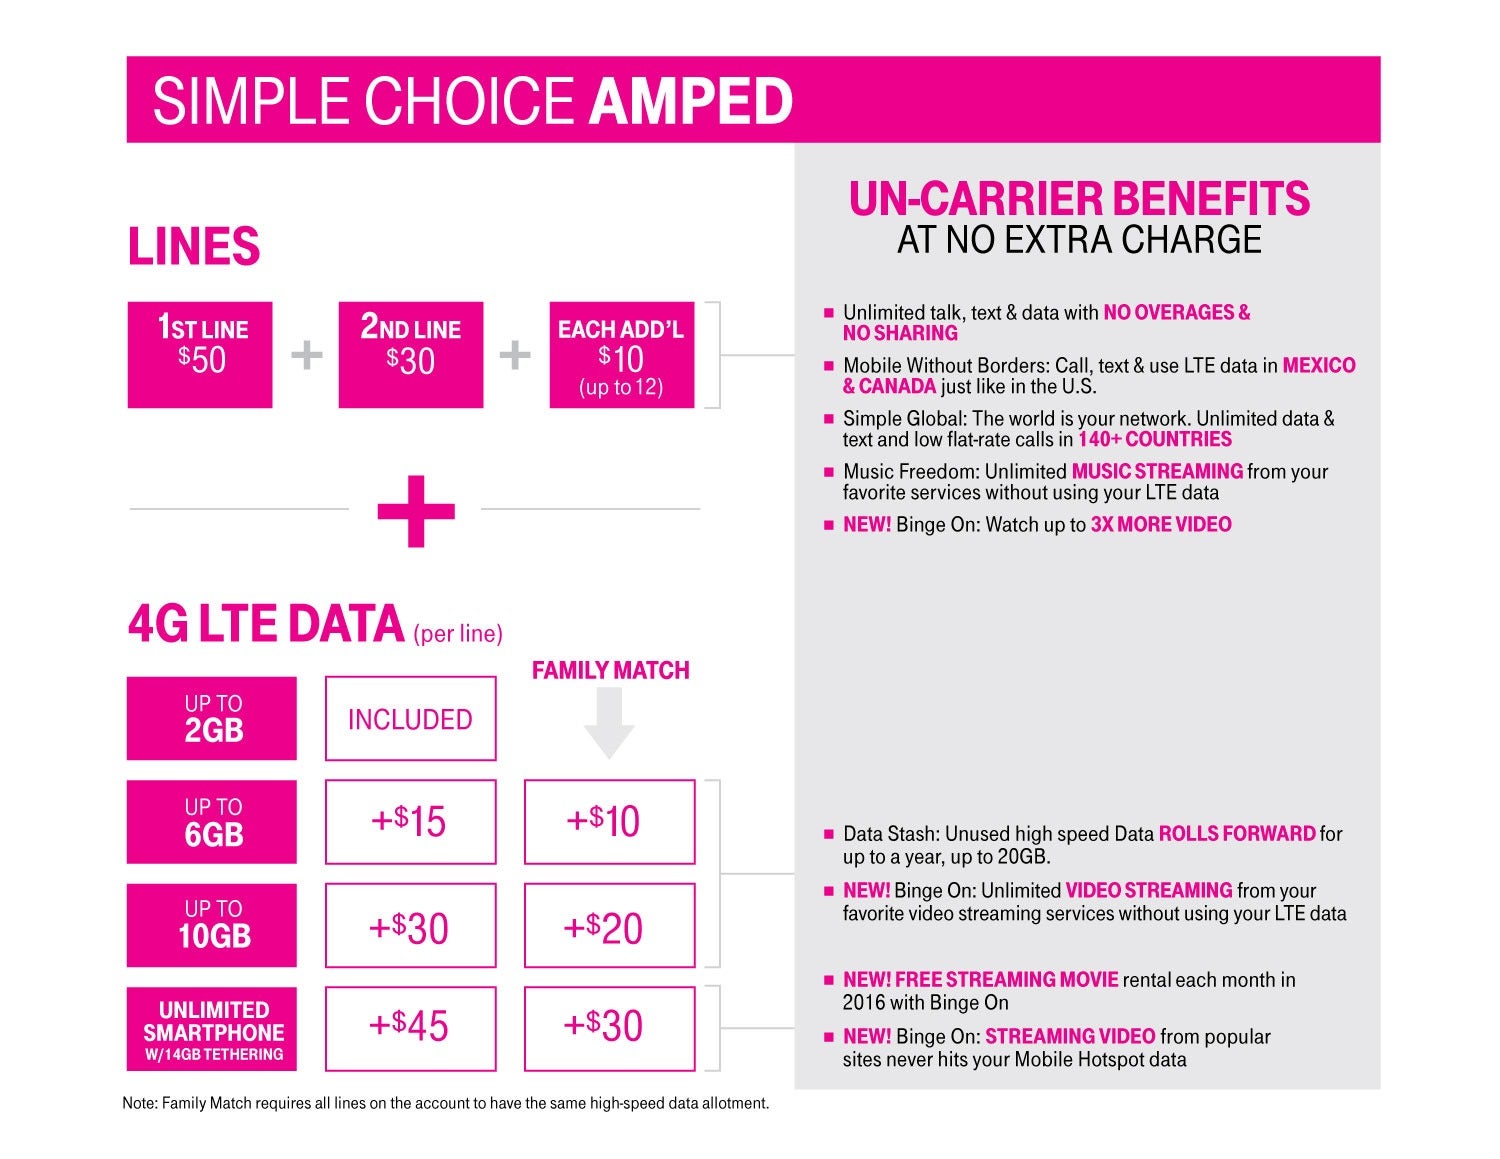 T-Mobile quietly hikes data plan prices and puts a cap on Data Stash